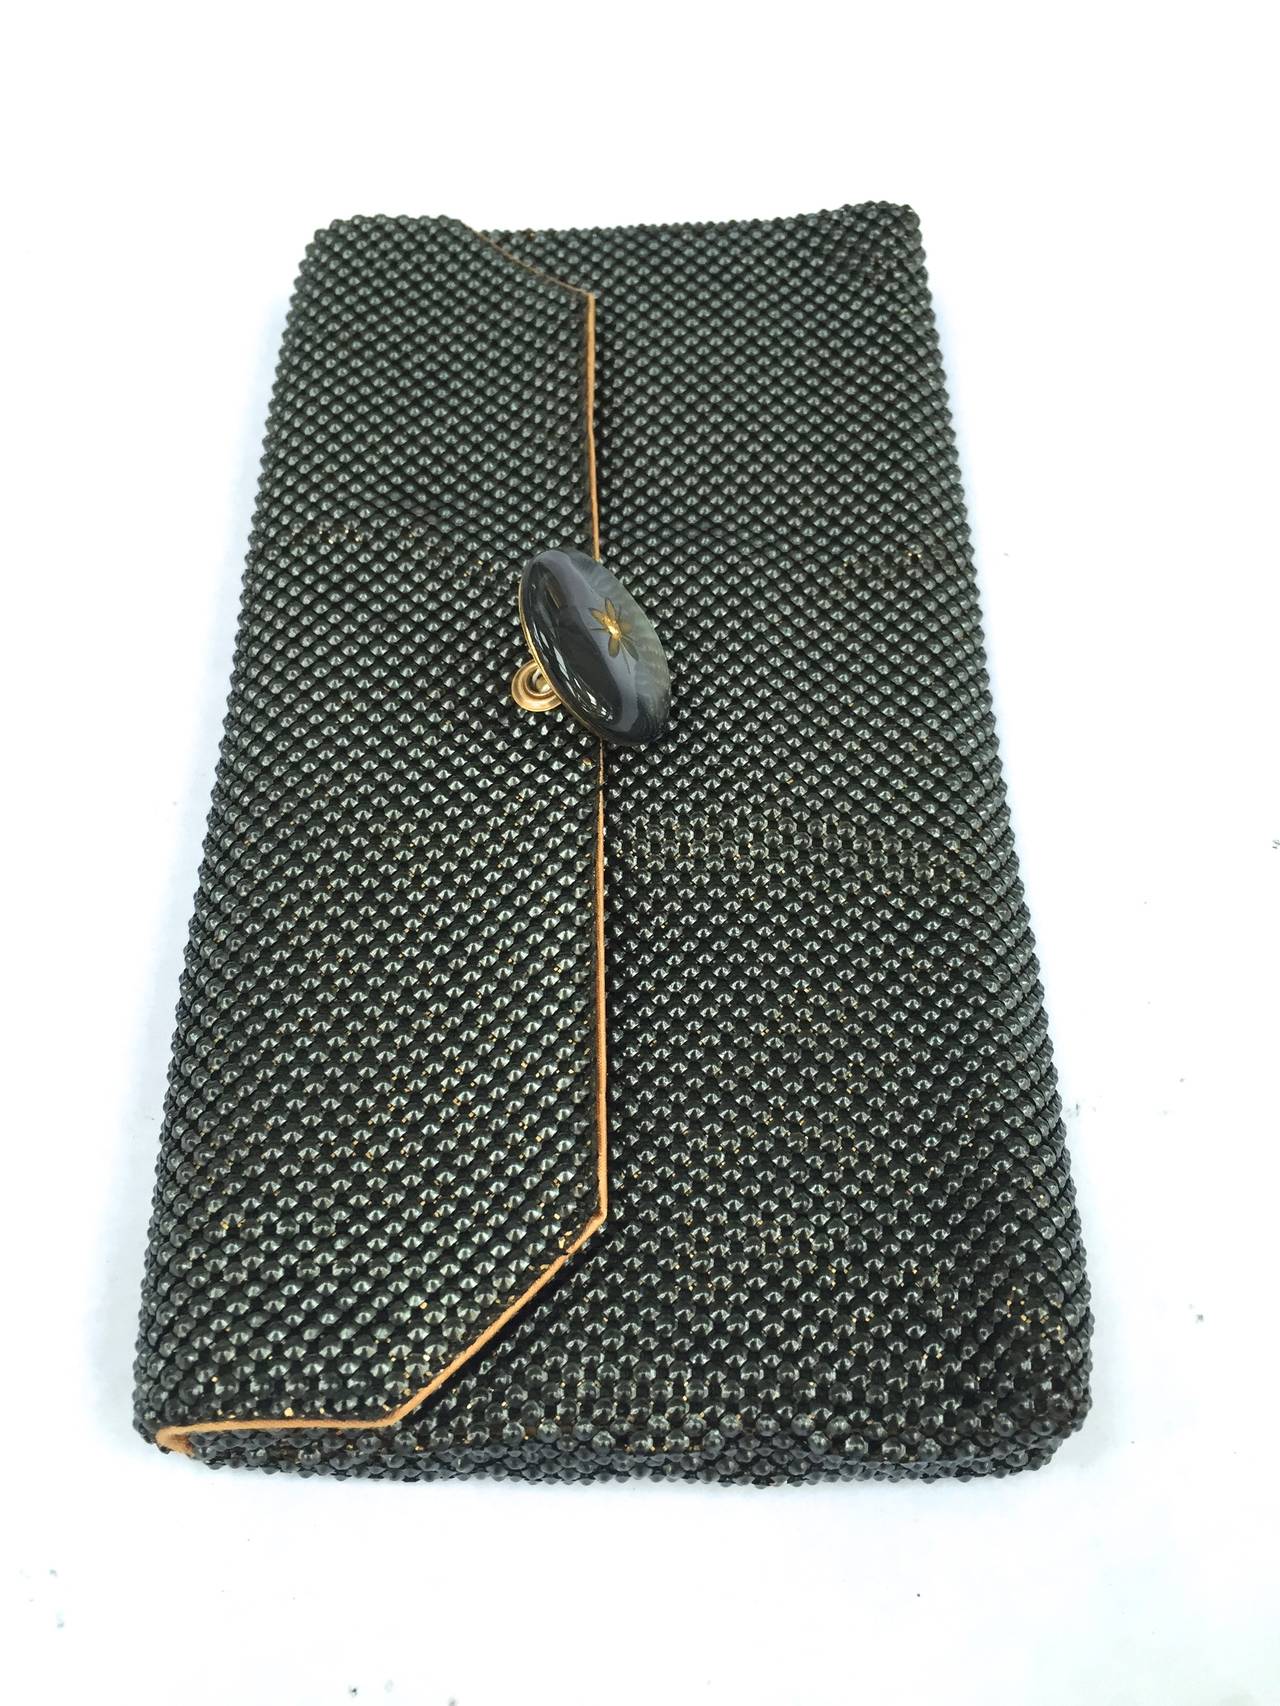 Whiting & Davis 60s black / bronze mesh flip clutch.
Bronze trim. 
Flip round button flower clasp with rhinestone .
Small square mirror wrapped in original envelope.
This clutch appears black but when light hits you see the bronze color making